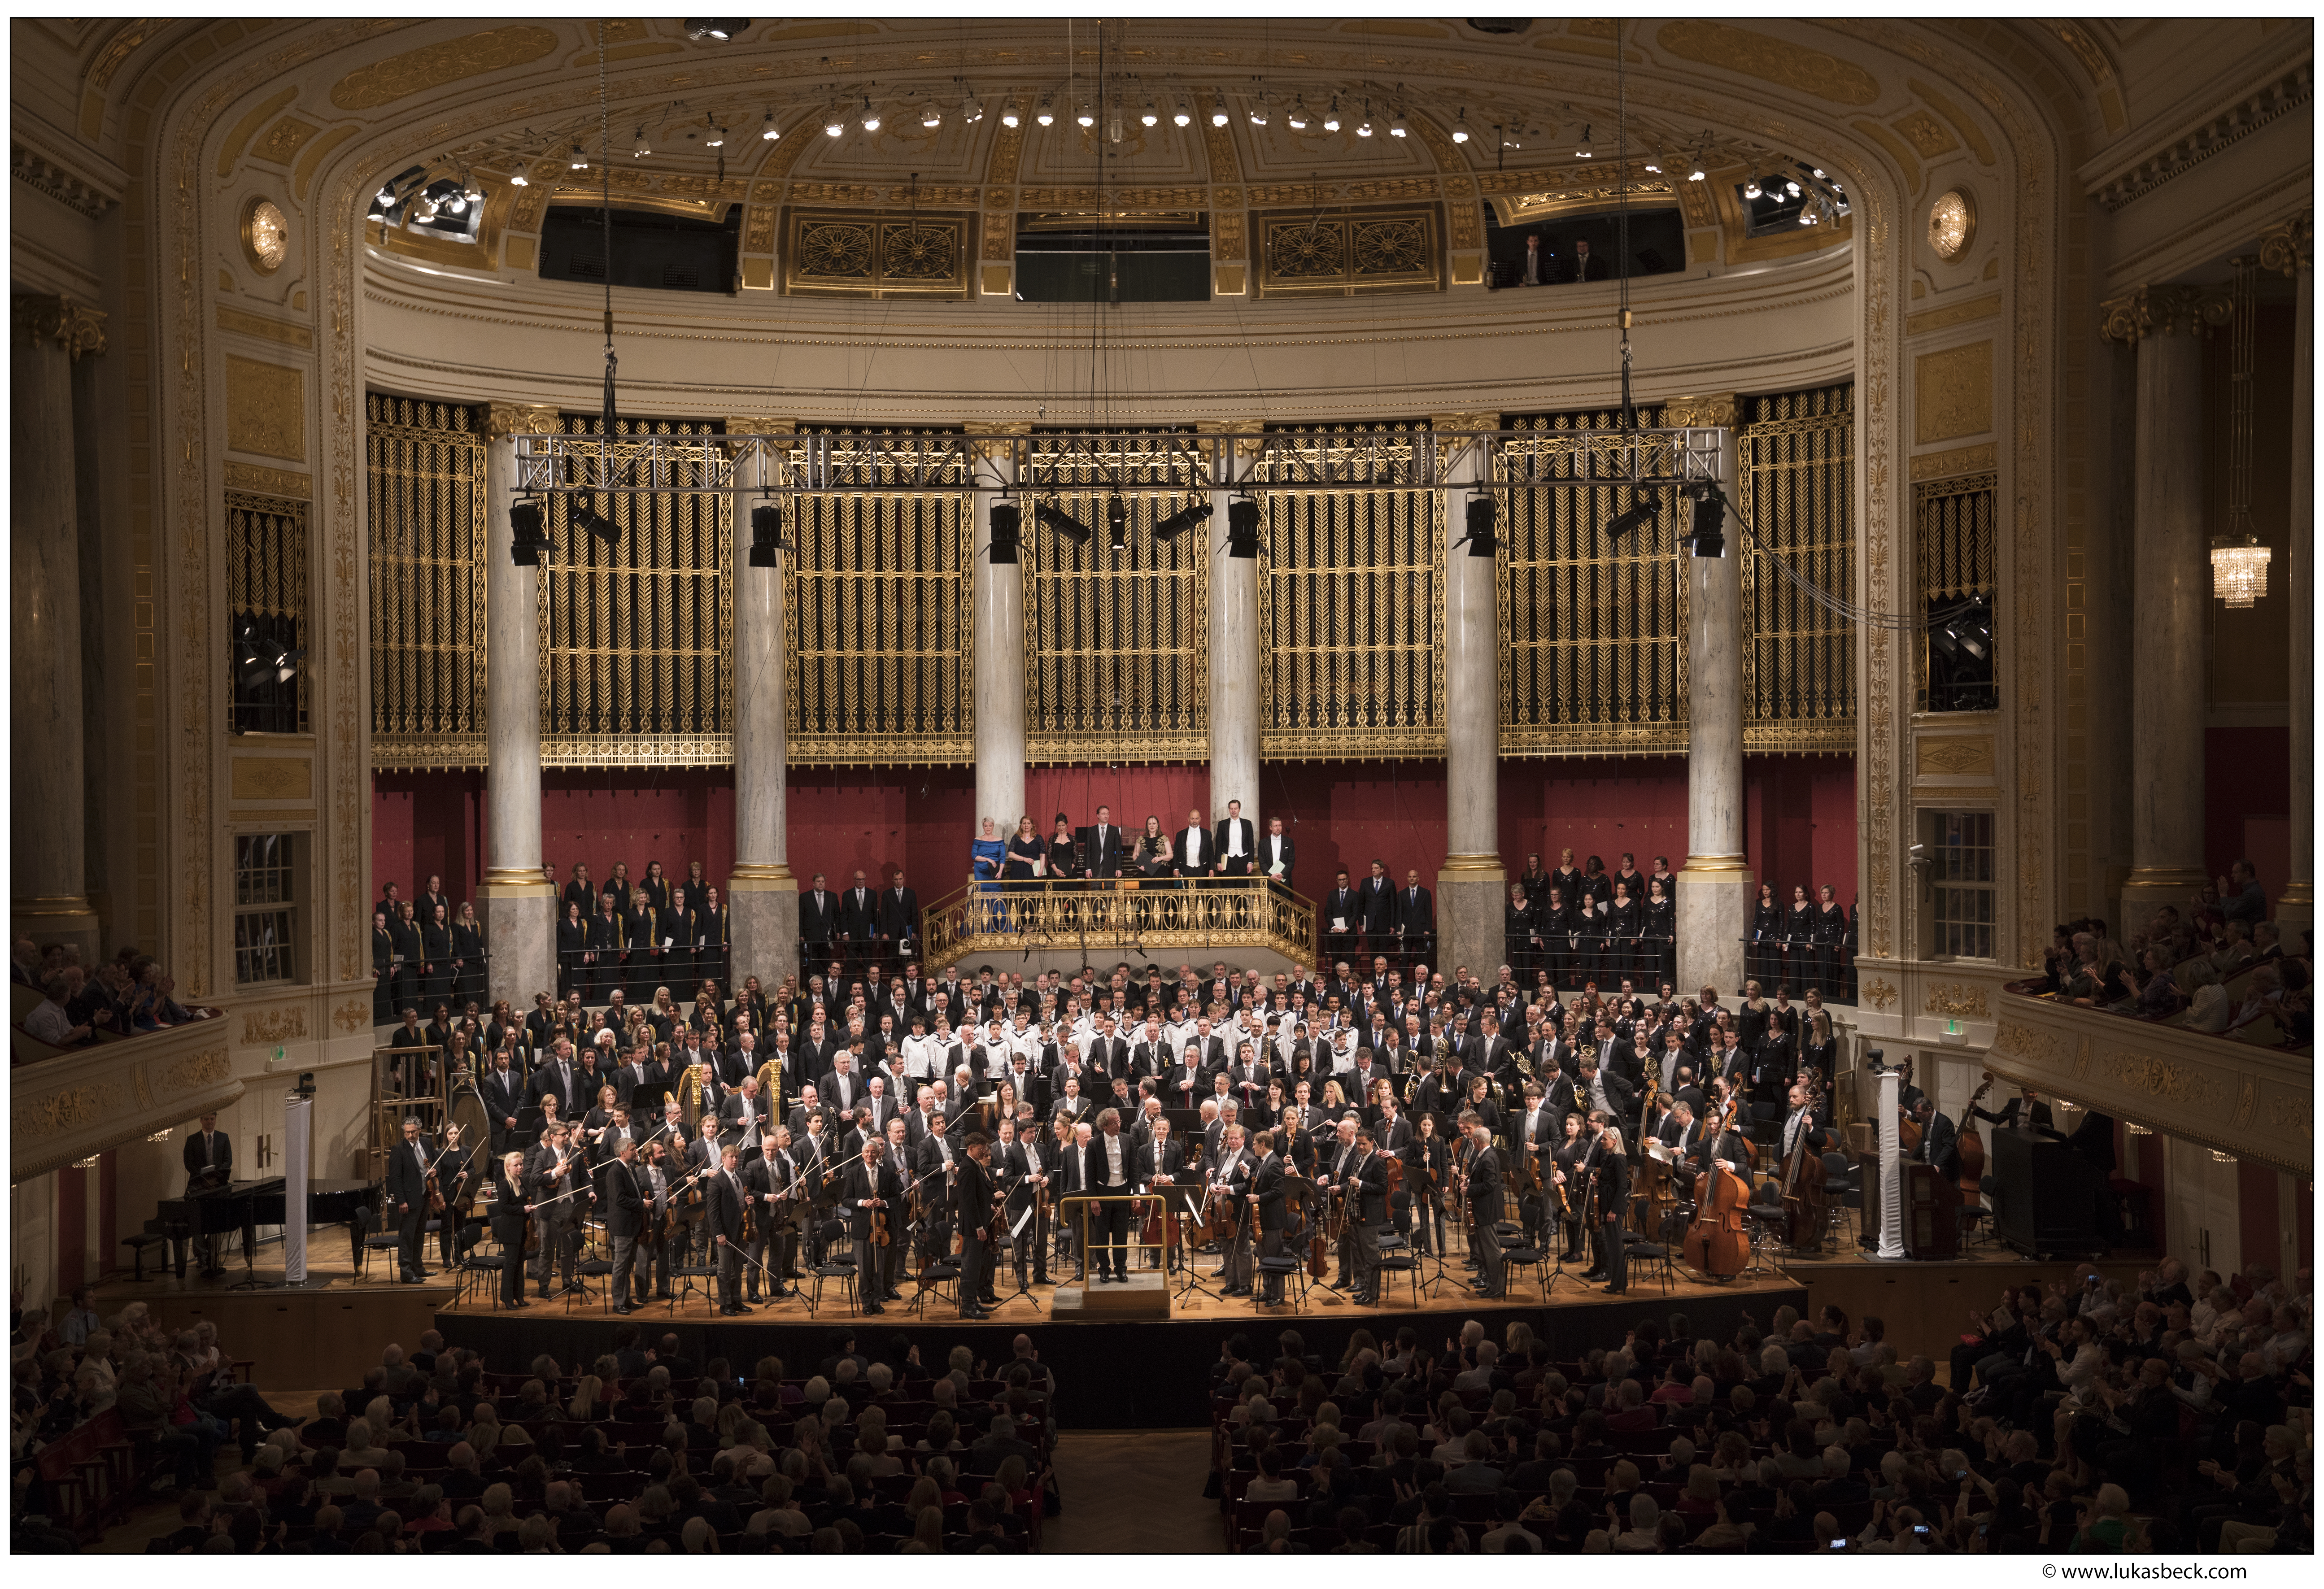 Franz Welser-Möst and the Vienna Philharmonic at the Wiener Konzerthaus conducting Mahler 8